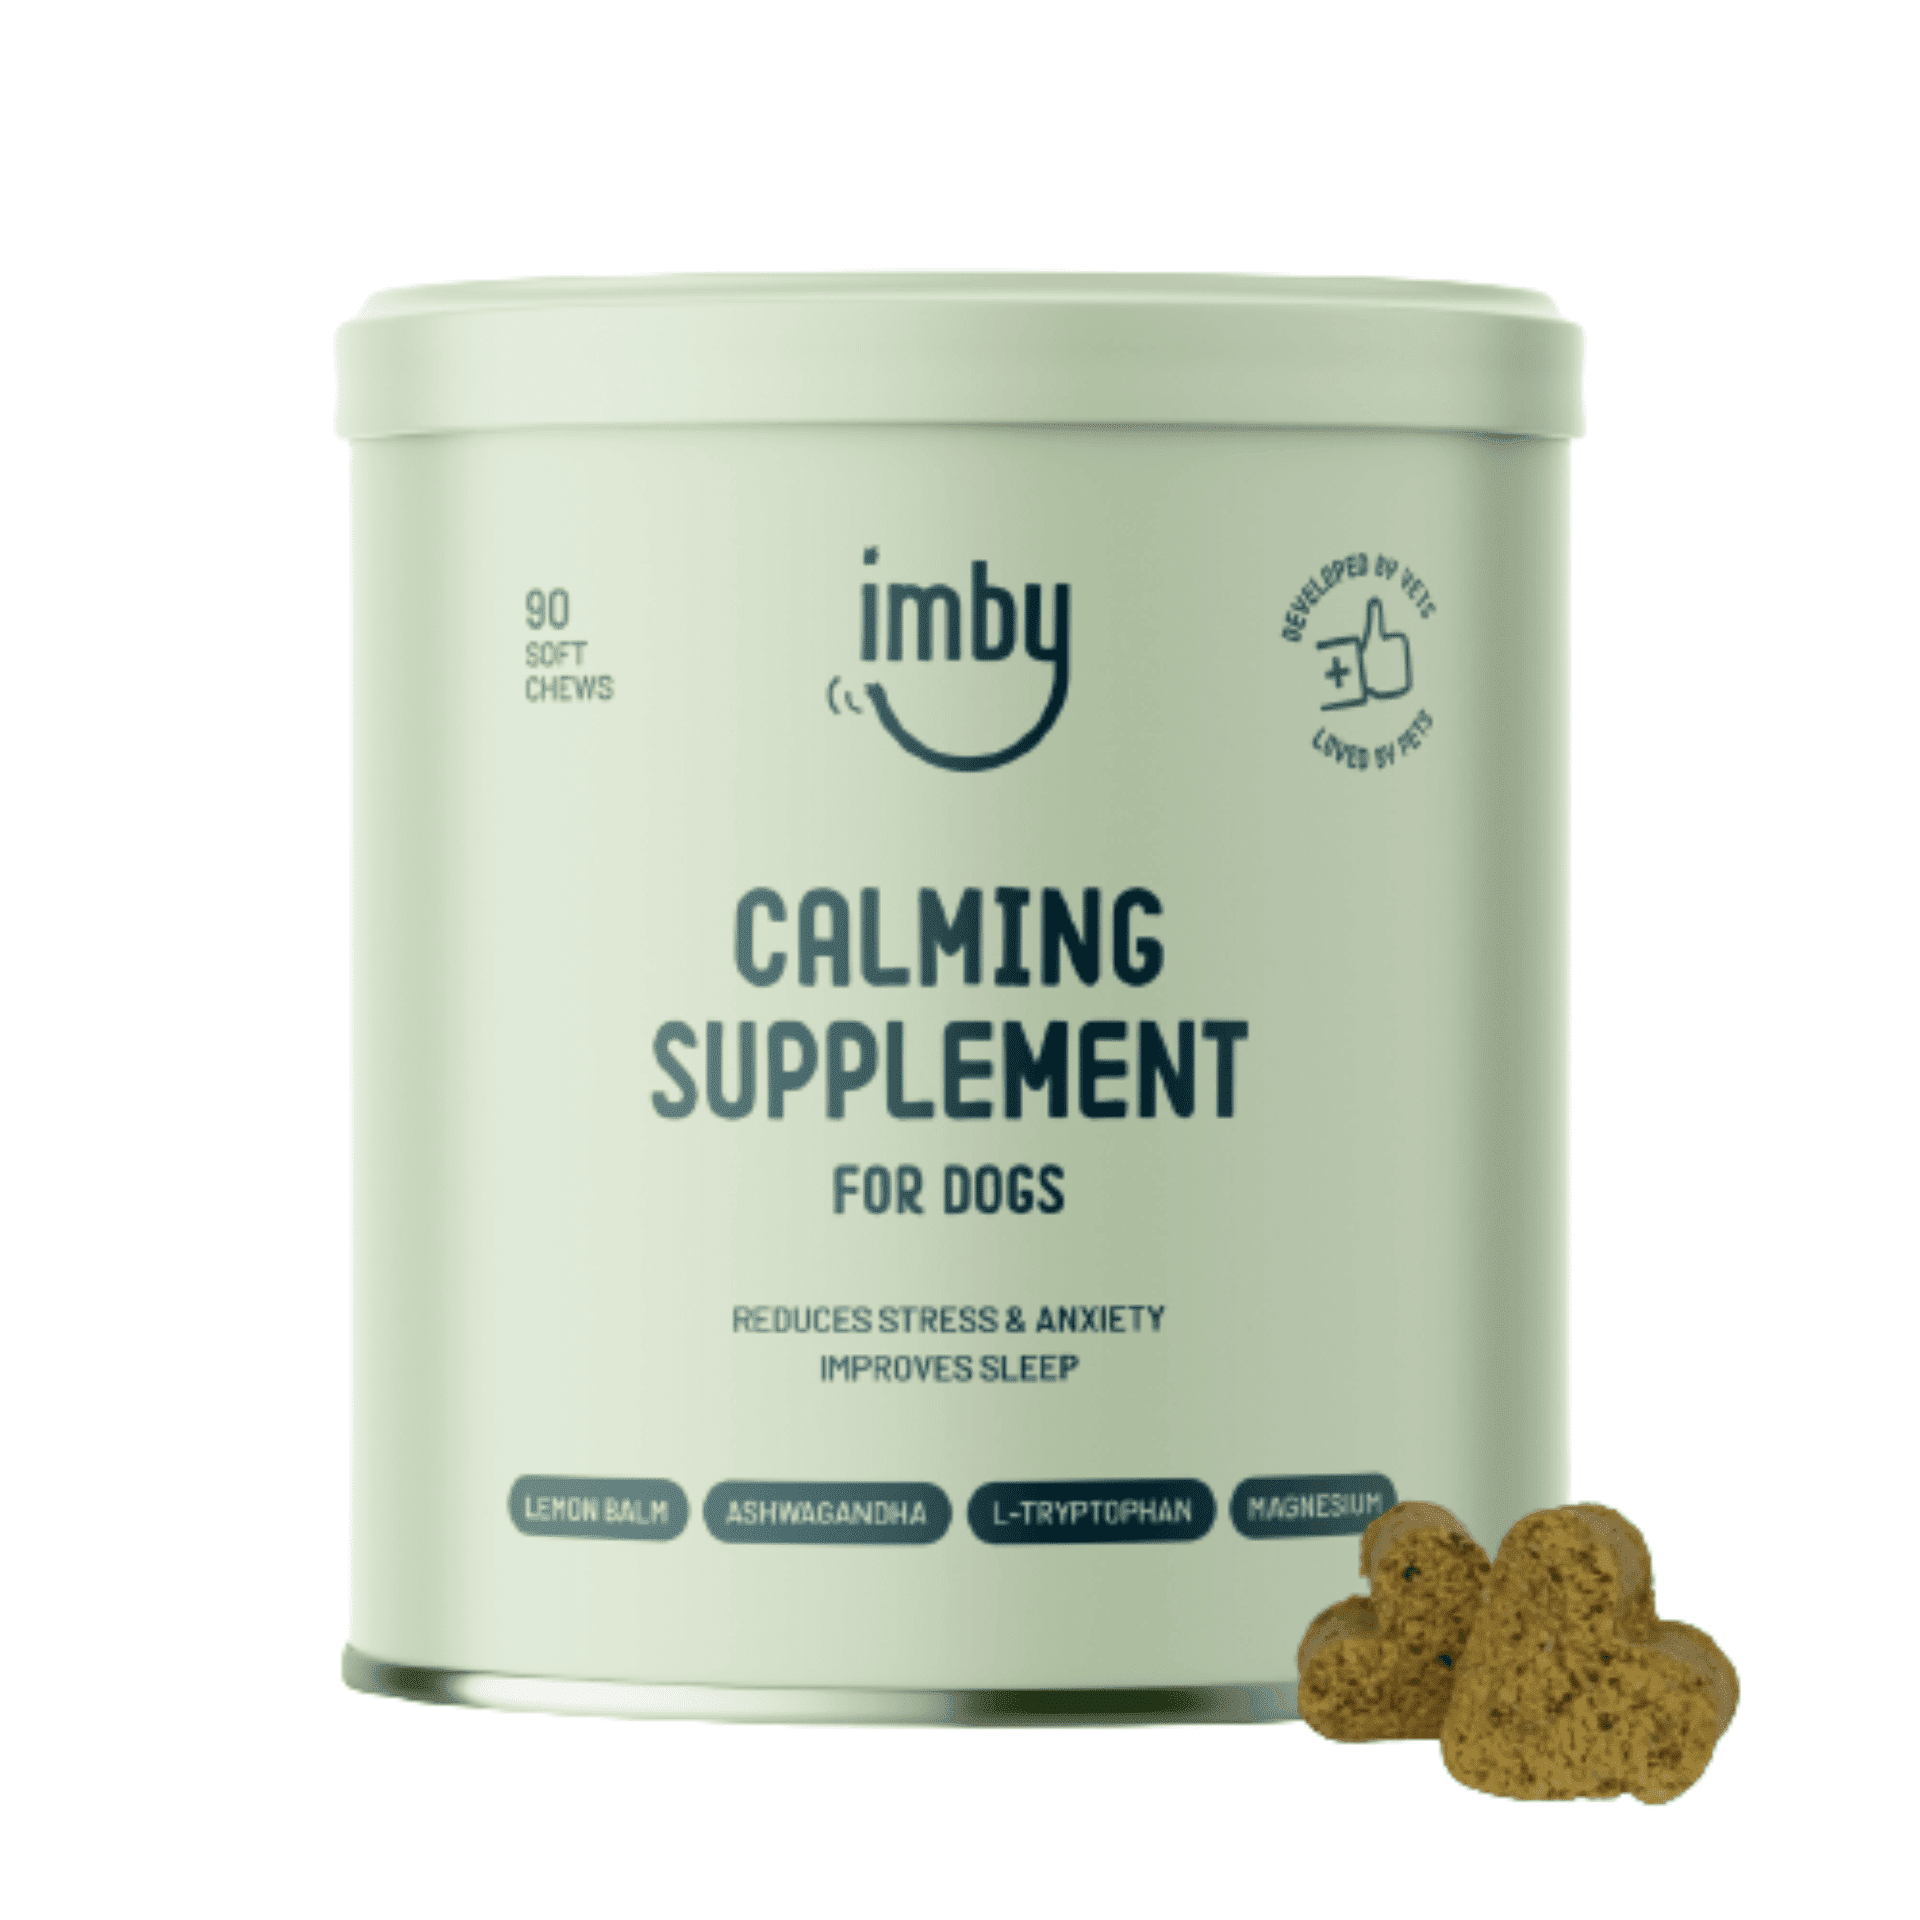 Imby Calming Supplement for Dogs